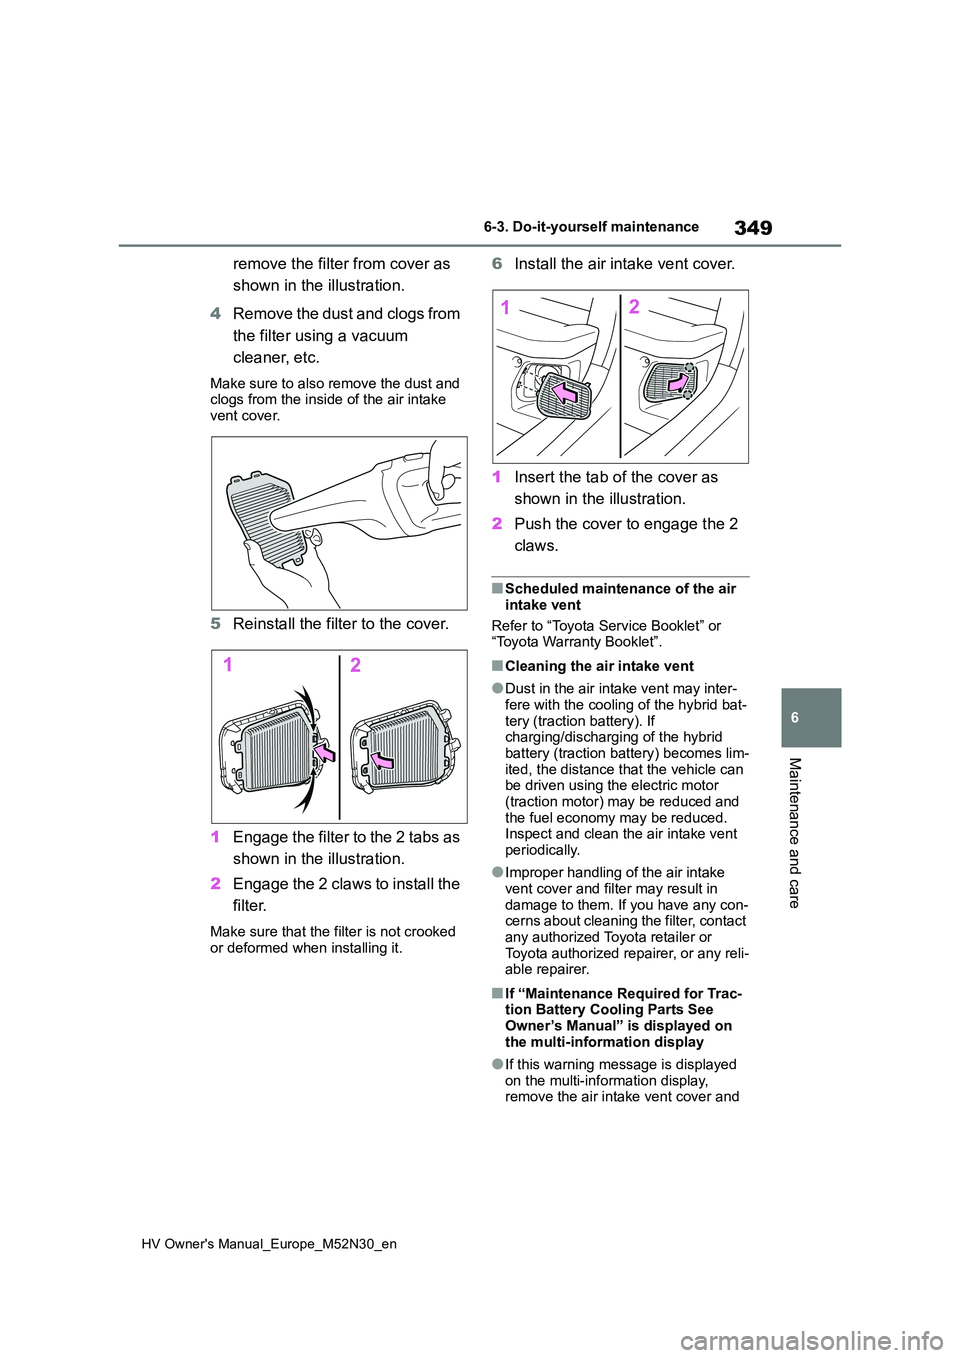 TOYOTA YARIS 2022  Owners Manual 349
6
HV Owner's Manual_Europe_M52N30_en
6-3. Do-it-yourself maintenance
Maintenance and care
remove the filter from cover as  
shown in the illustration. 
4 Remove the dust and clogs from  
the f